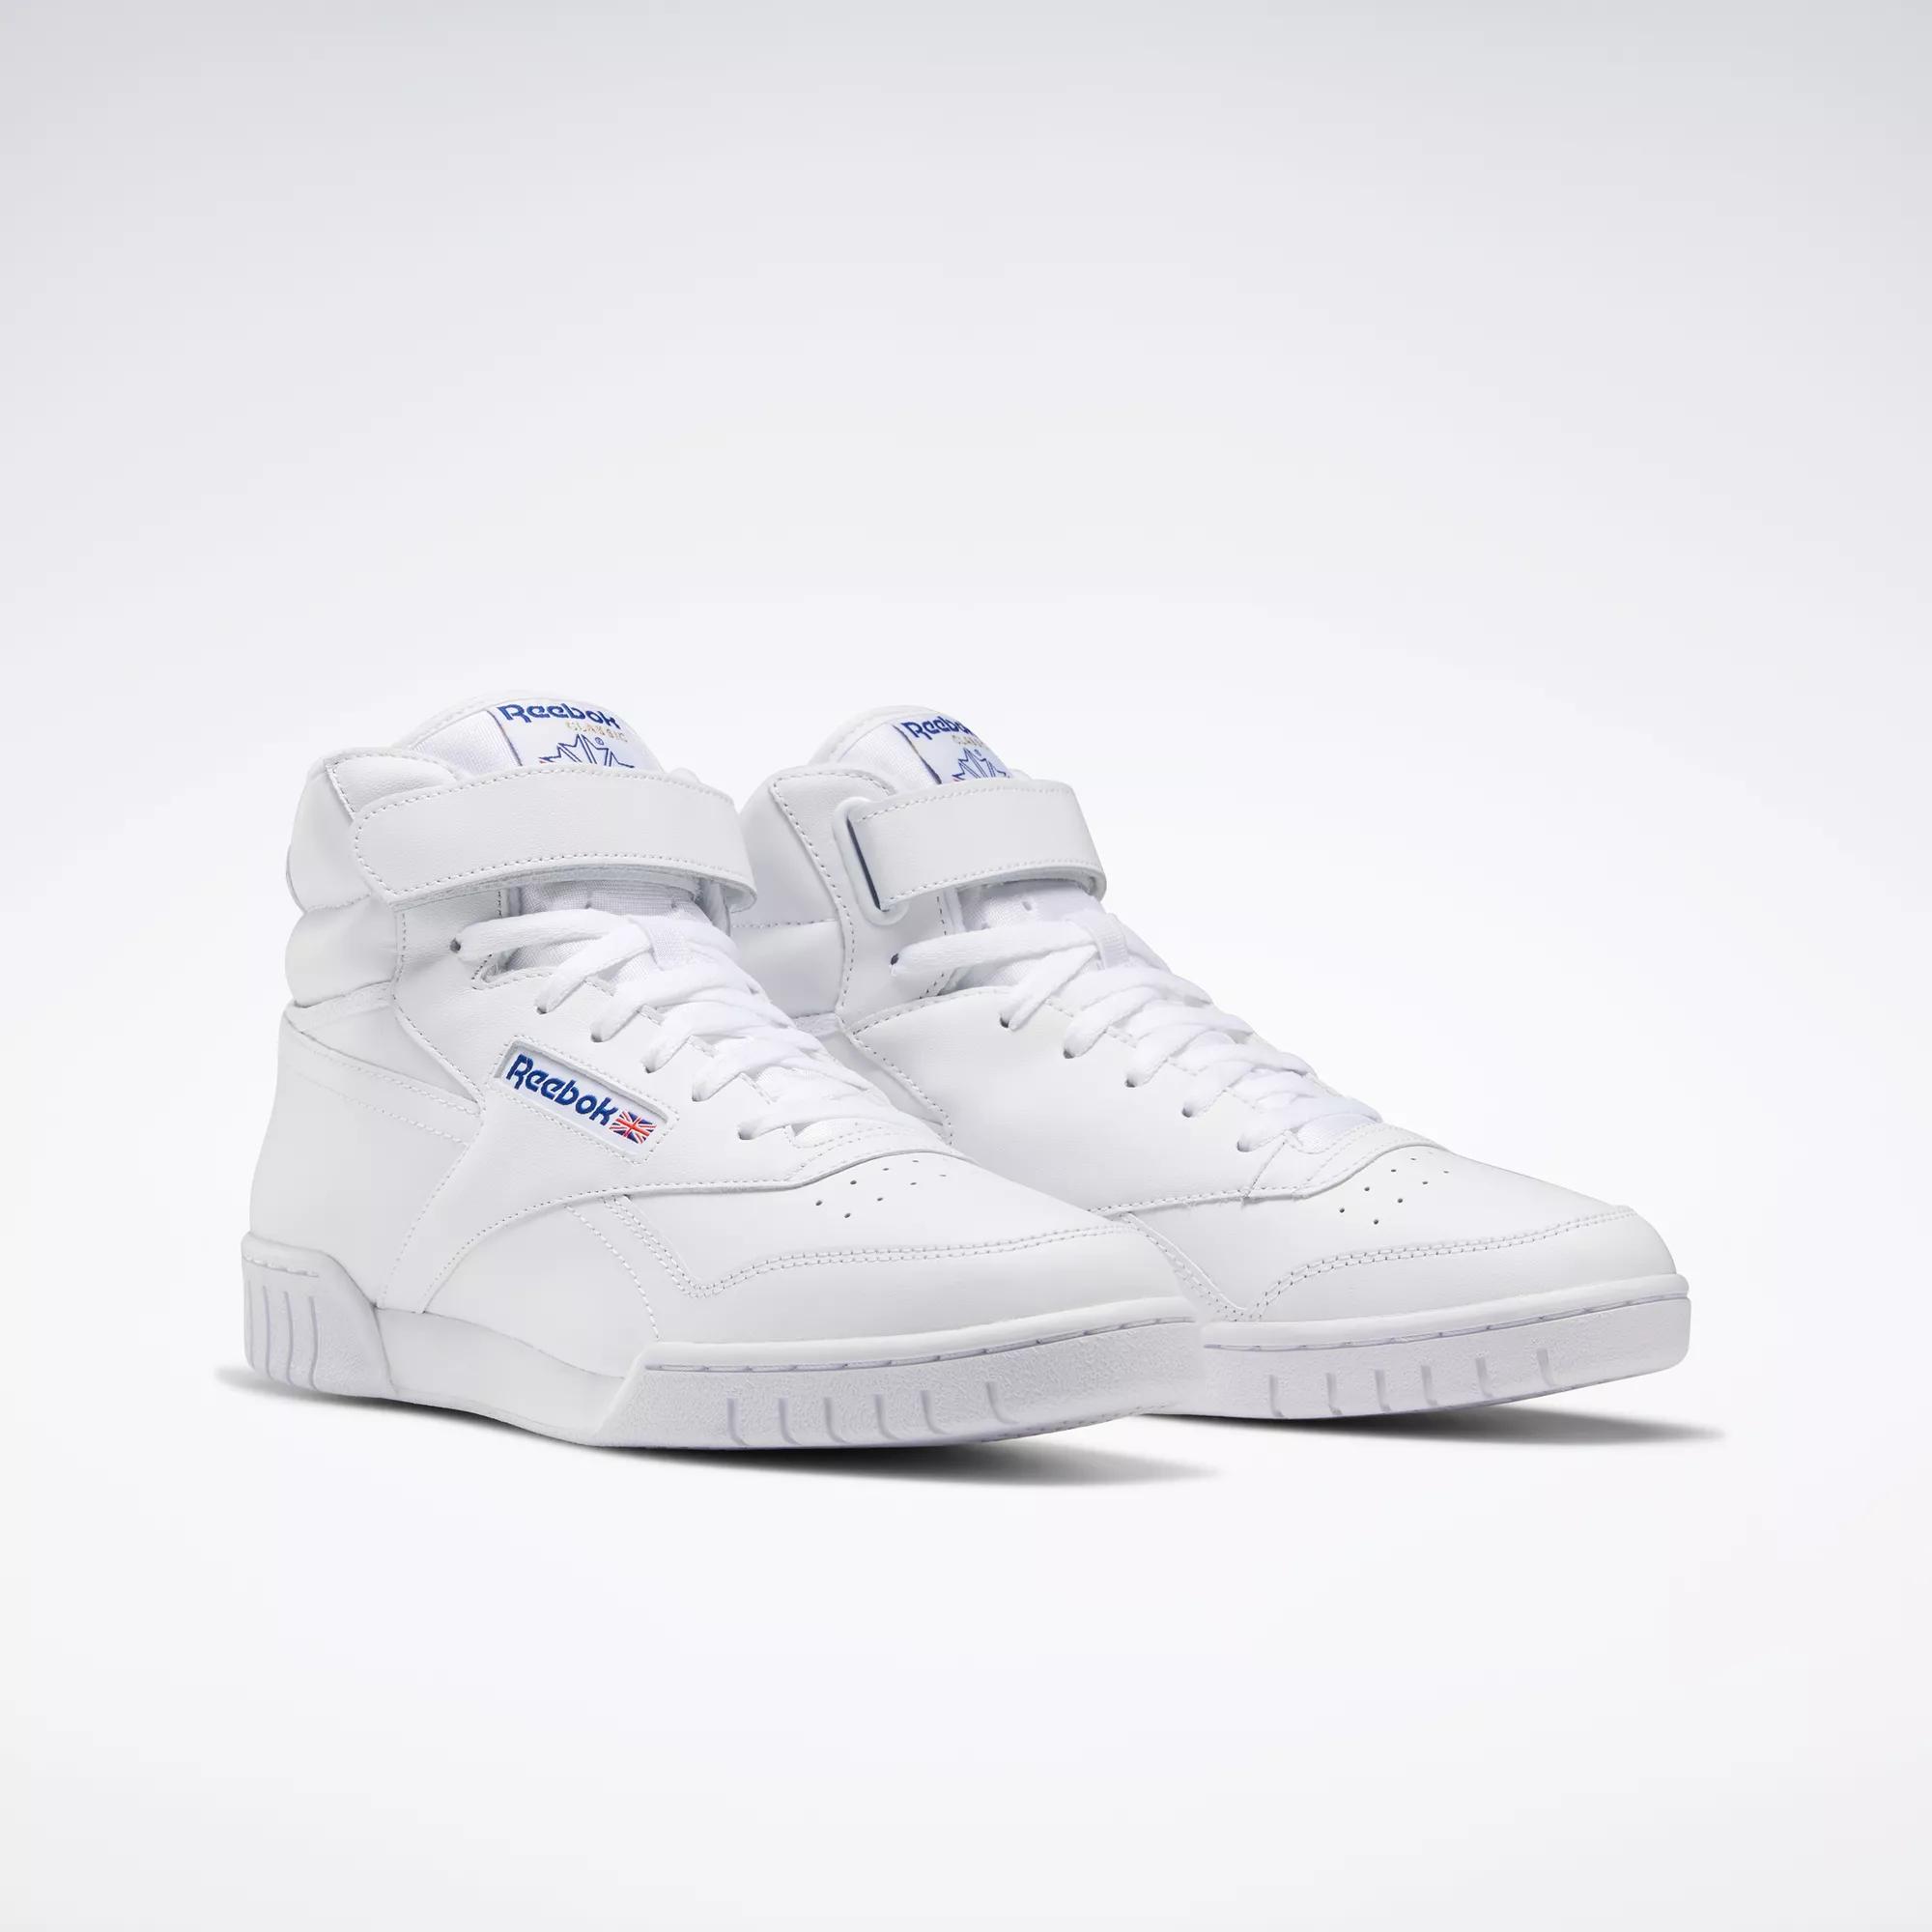 The Reebok Exo Fit Trainer Arrives in Hi Top Version - 80's Casual Classics